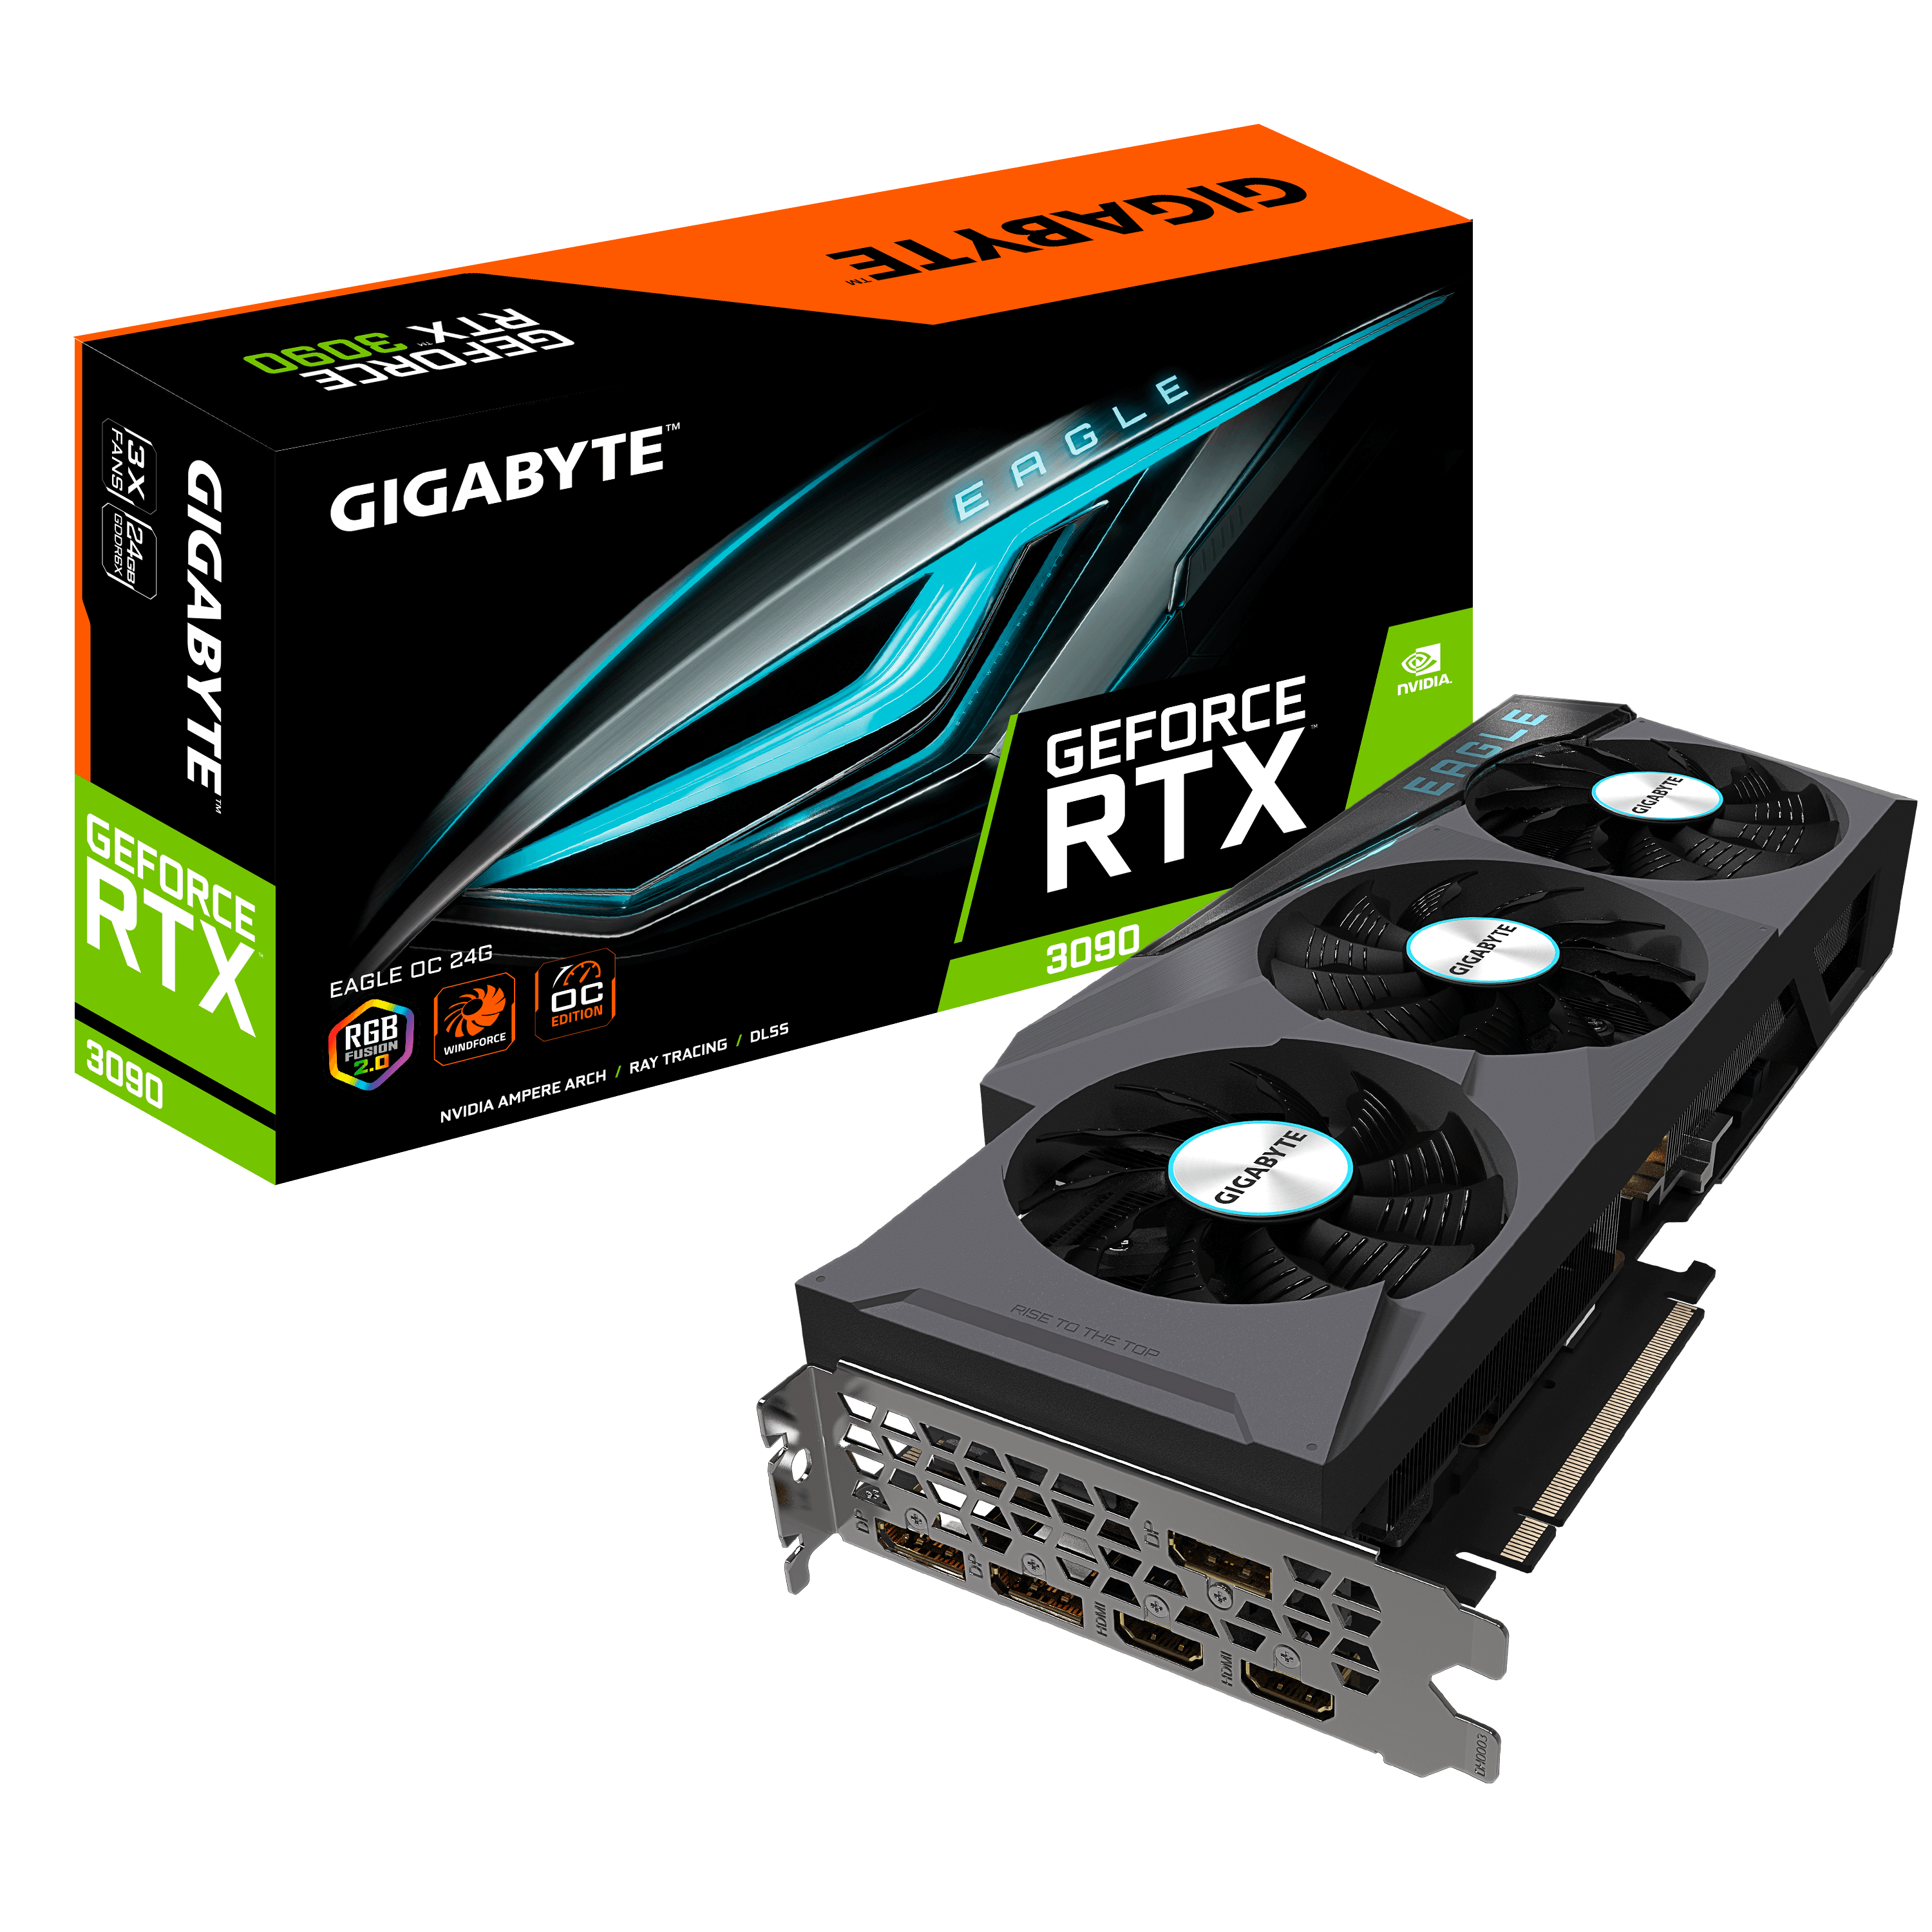 GIGABYTE Releases GeForce RTX™ 30 Series Graphics Cards | News 